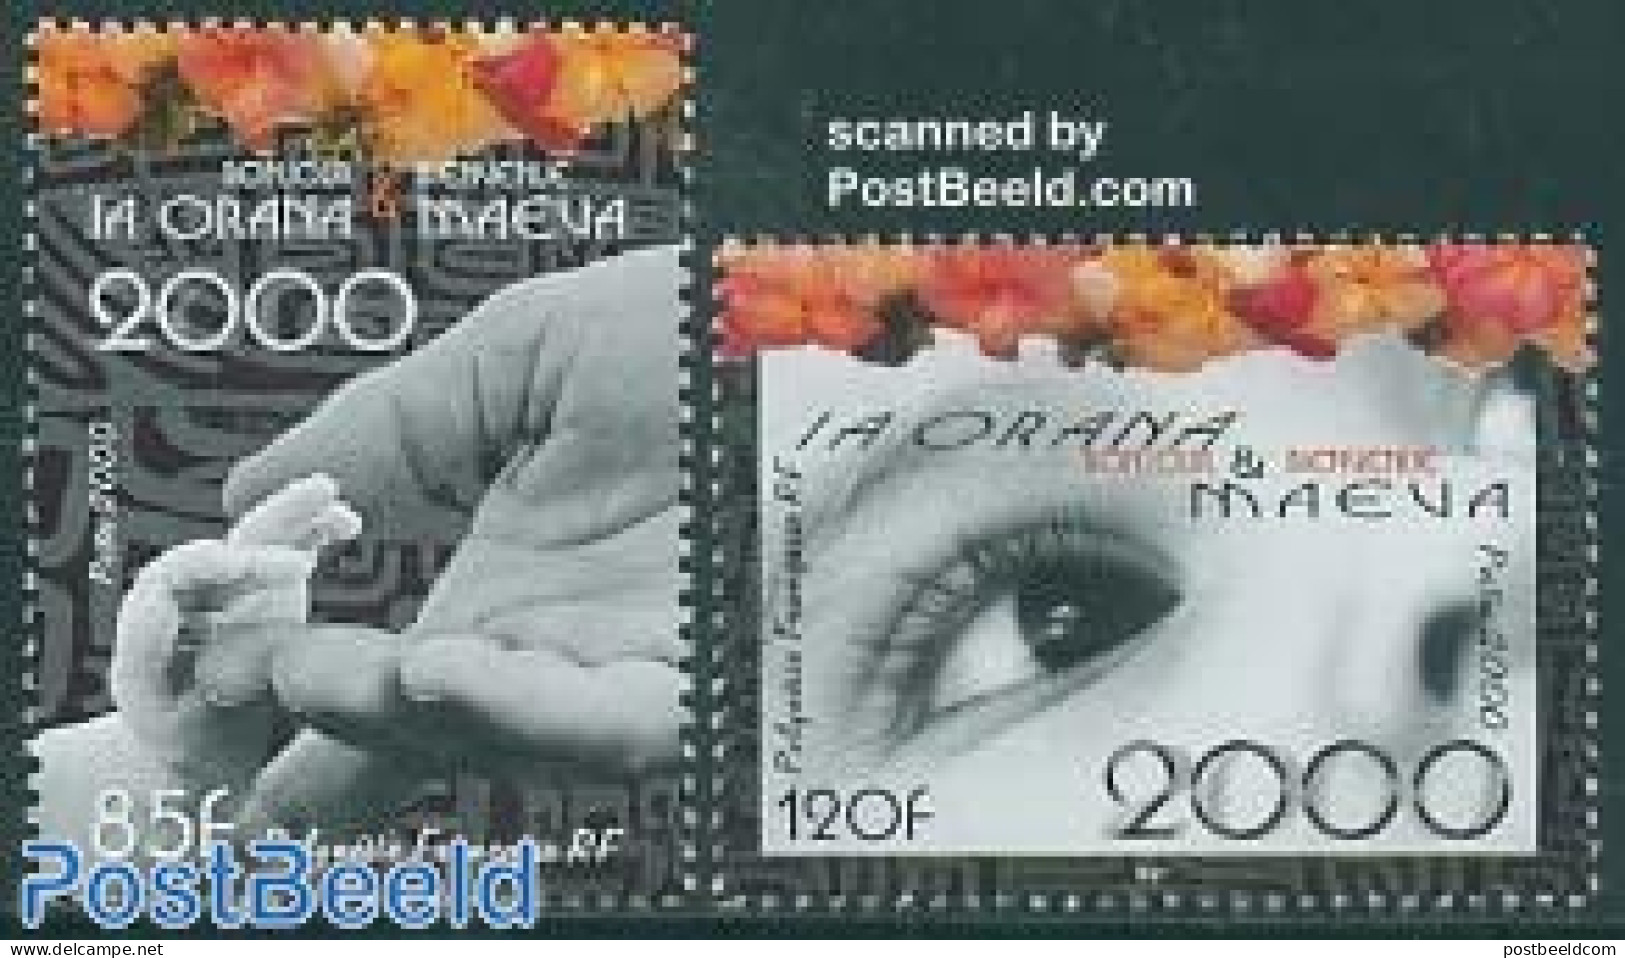 French Polynesia 2000 The Year 2000 2v, Mint NH, Various - New Year - Nuovi